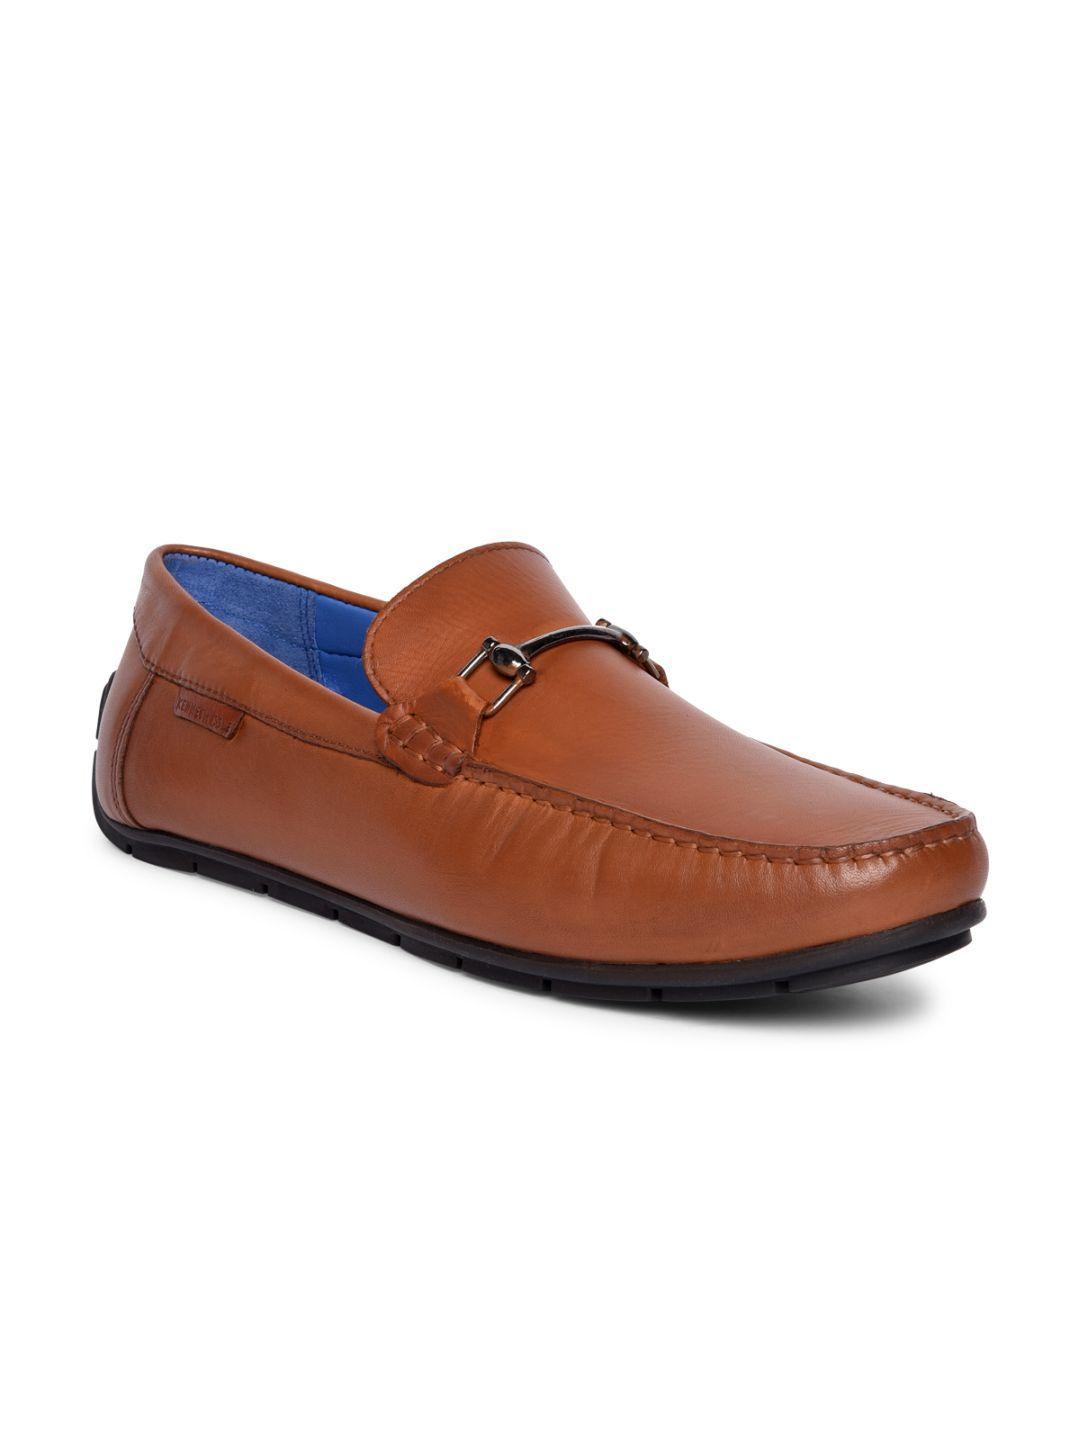 kenneth cole men tan brown leather loafers